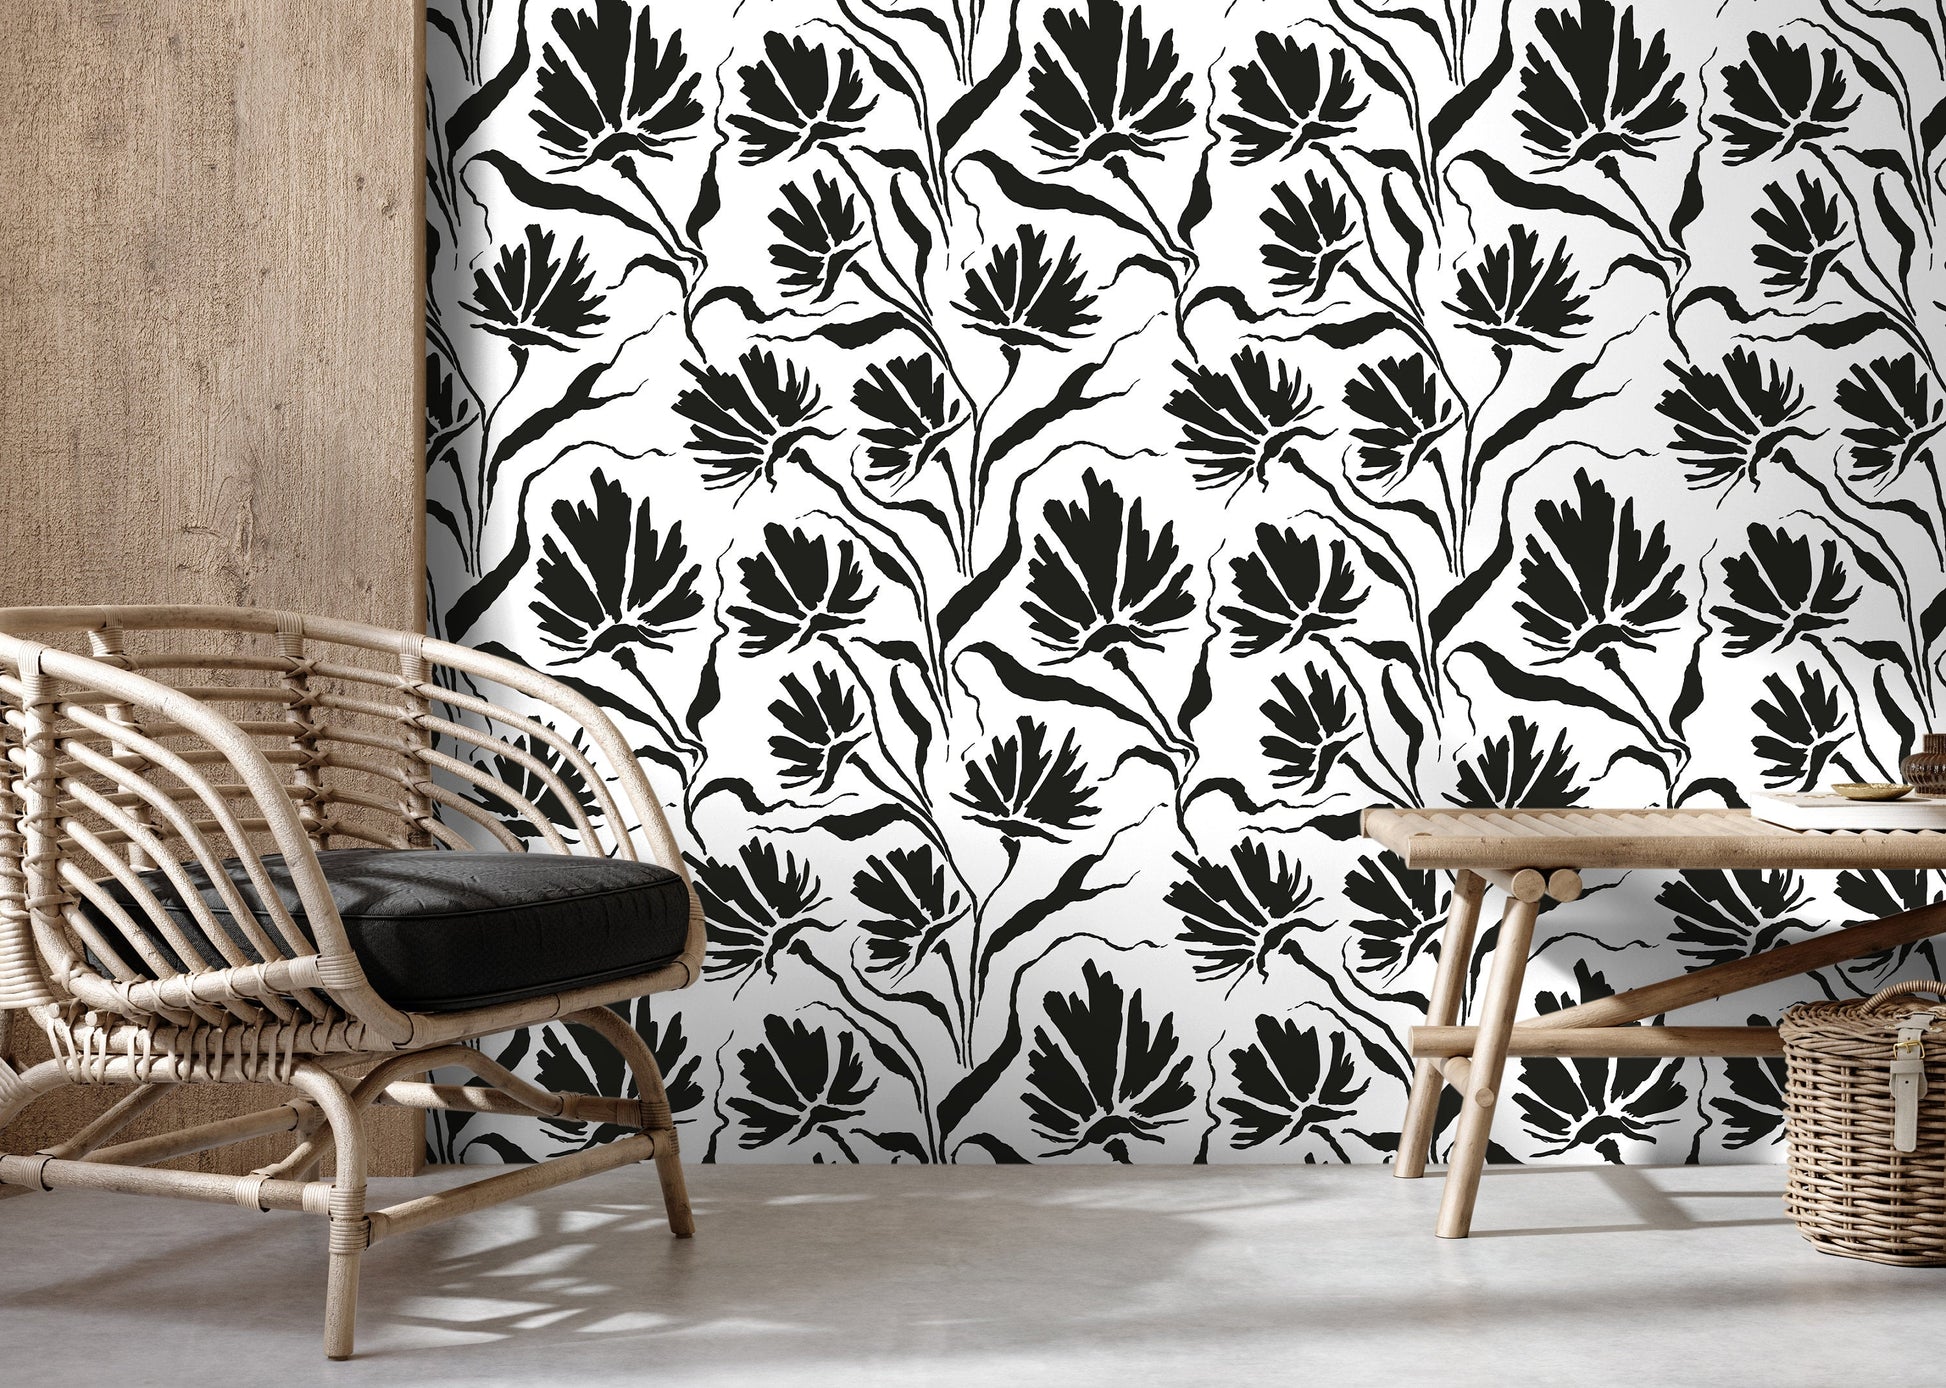 Black and White Leaf Wallpaper / Peel and Stick Wallpaper Removable Wallpaper Home Decor Wall Art Wall Decor Room Decor - C672